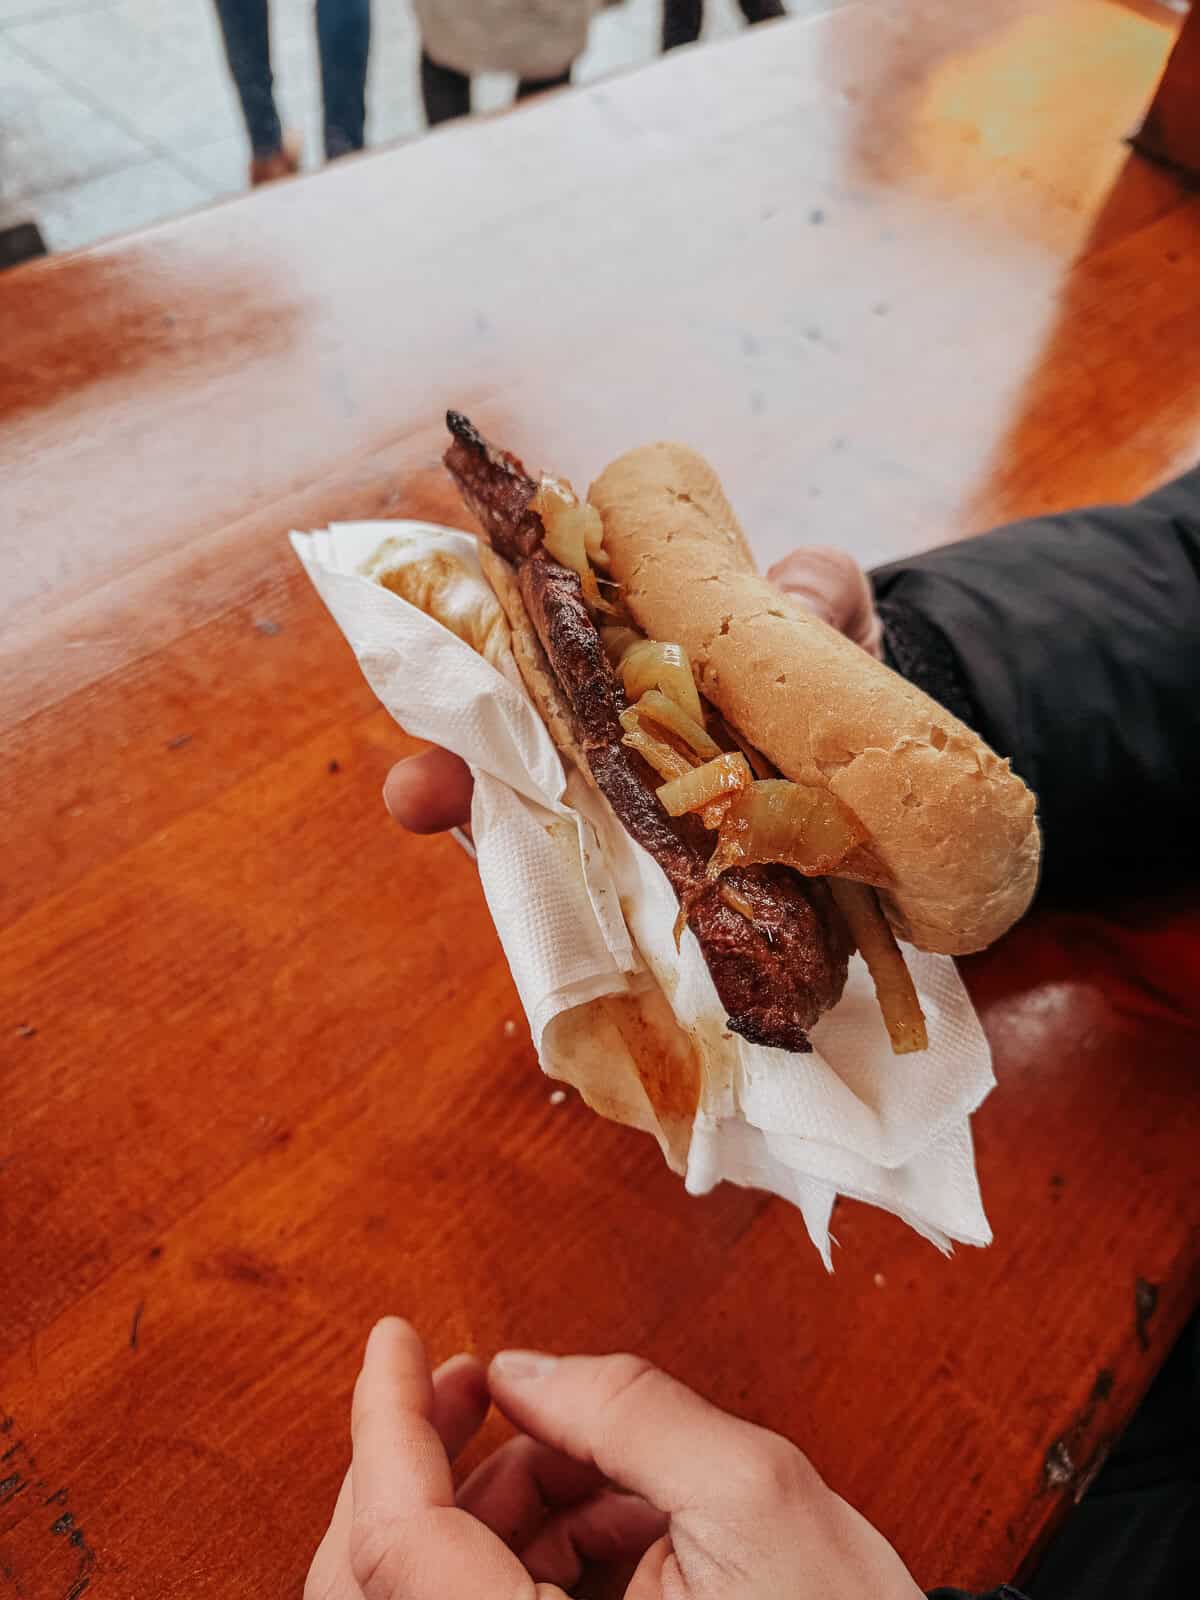 A street food vendor handing over a steak sandwich loaded with grilled steak, caramelized onions, and pickles in a crusty baguette, wrapped in a napkin